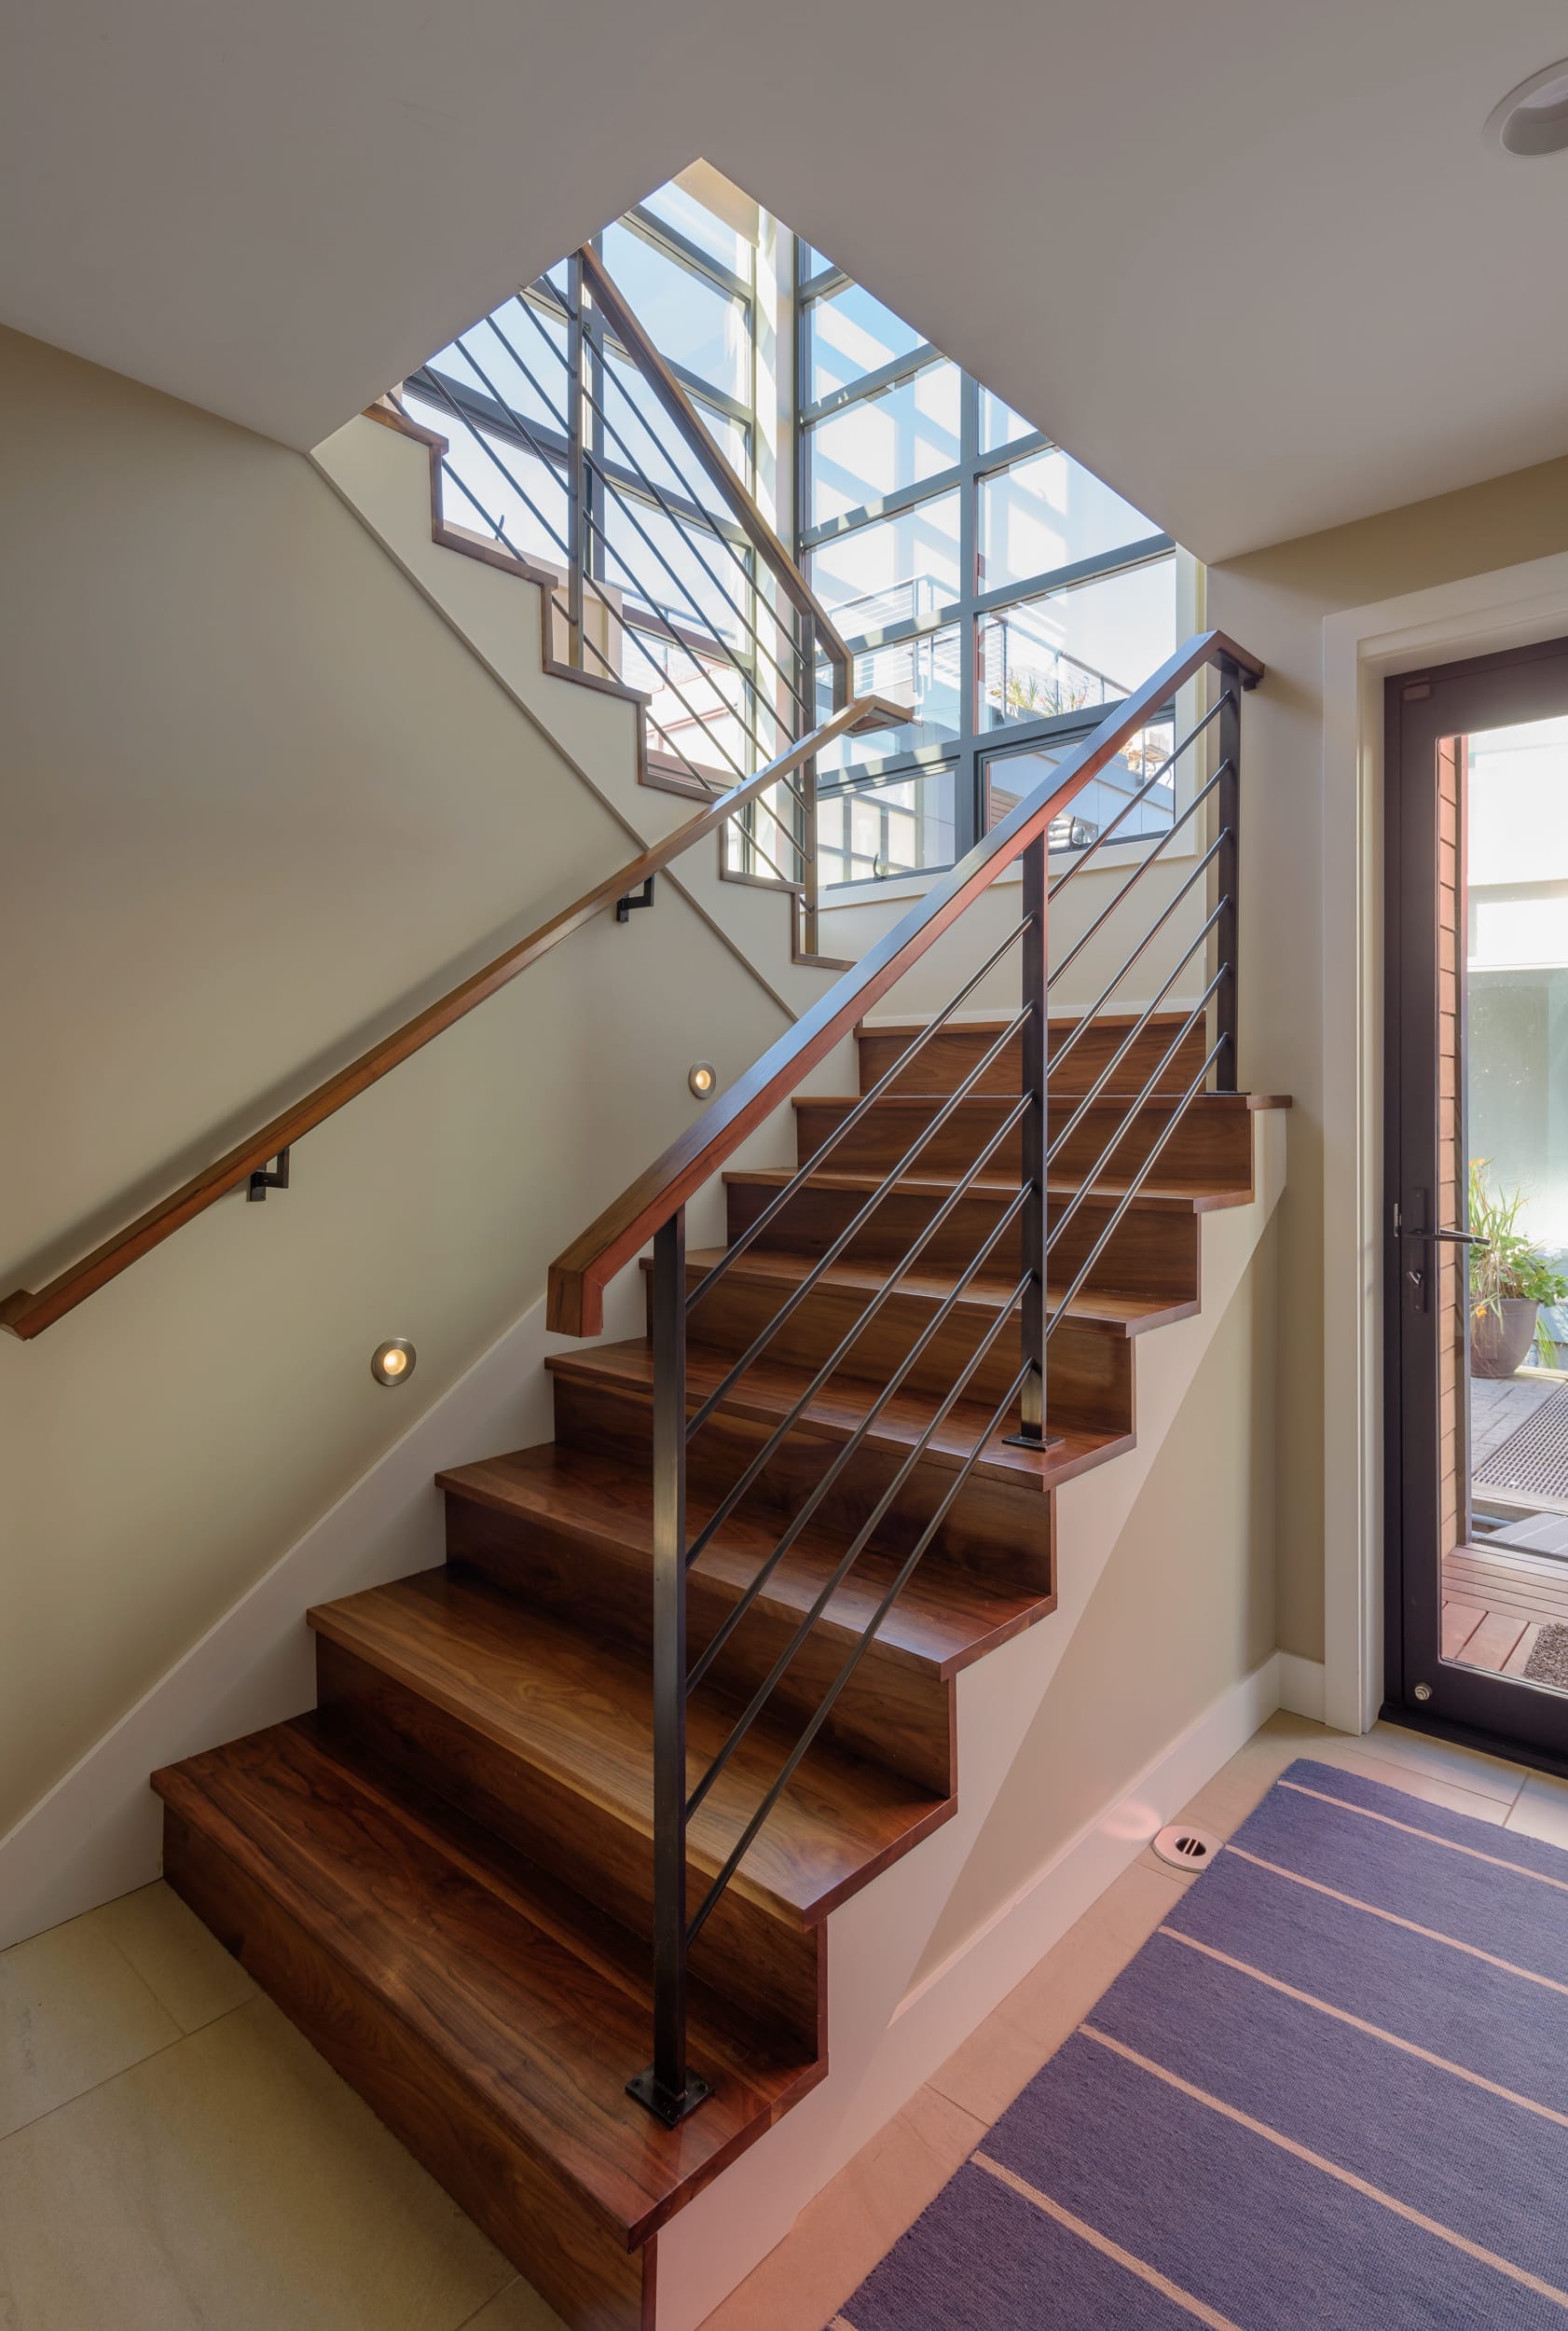 A modern staircase in a home with a glass door.